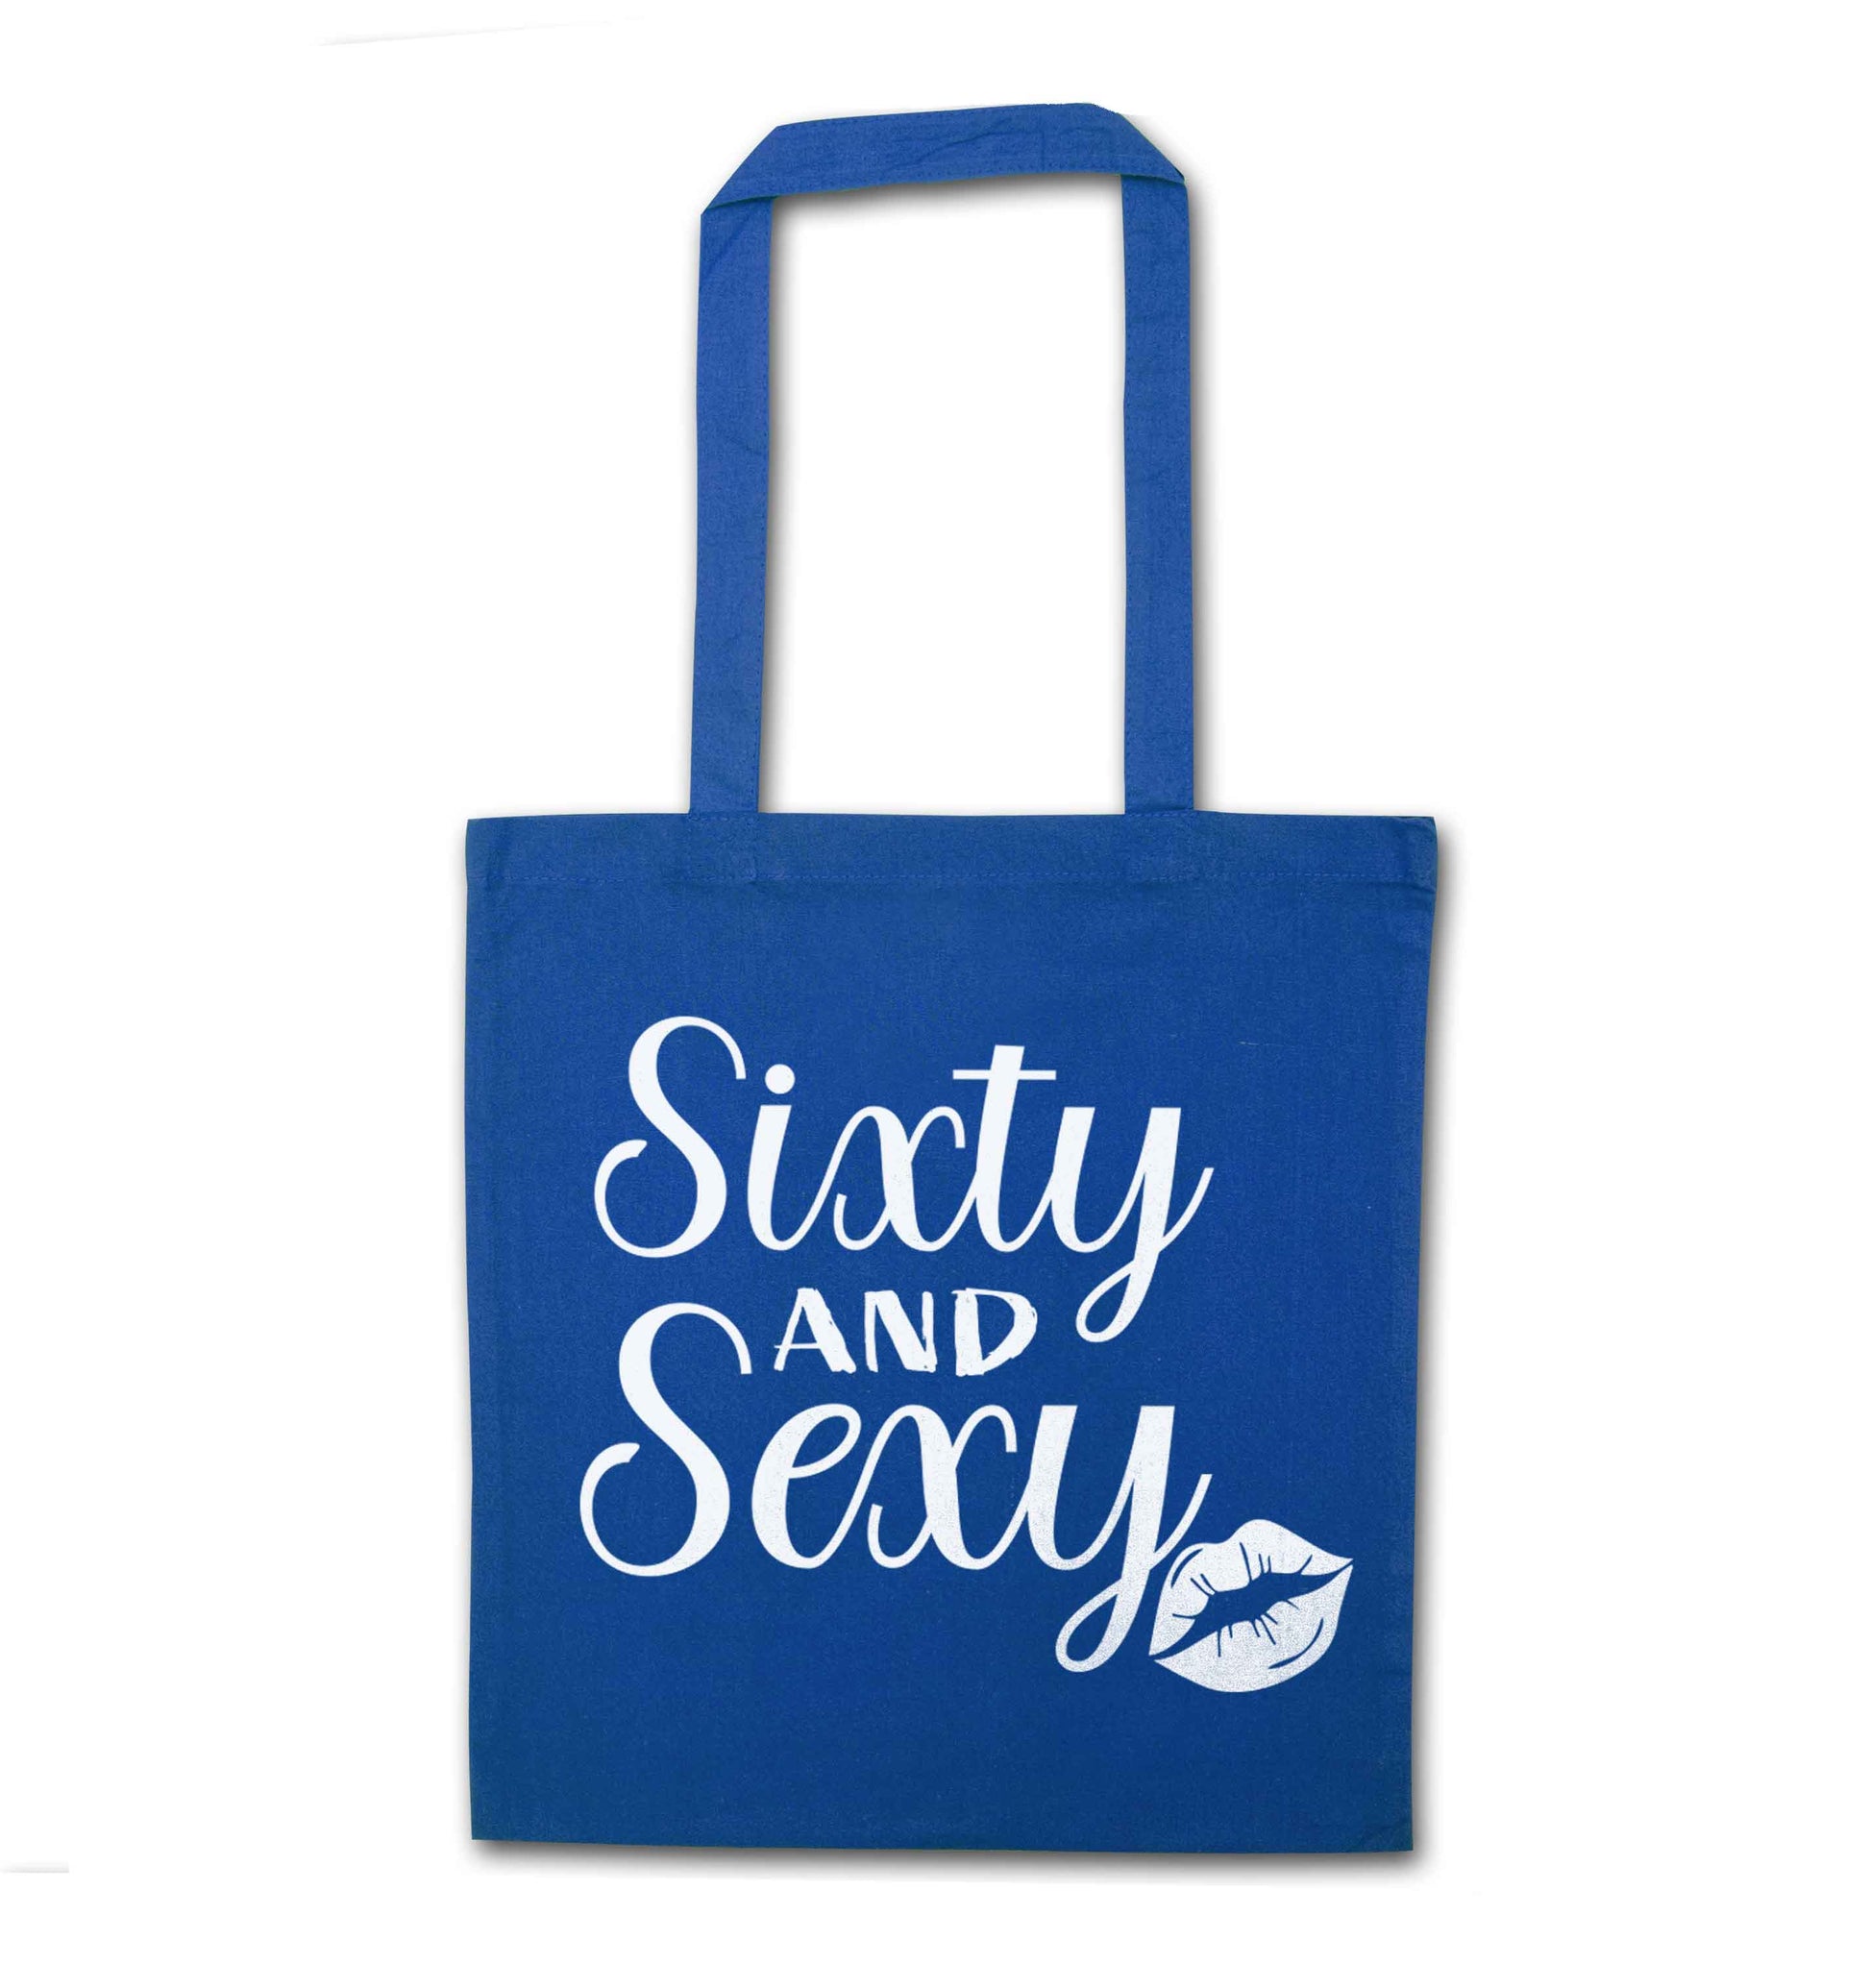 Sixty and sexy blue tote bag